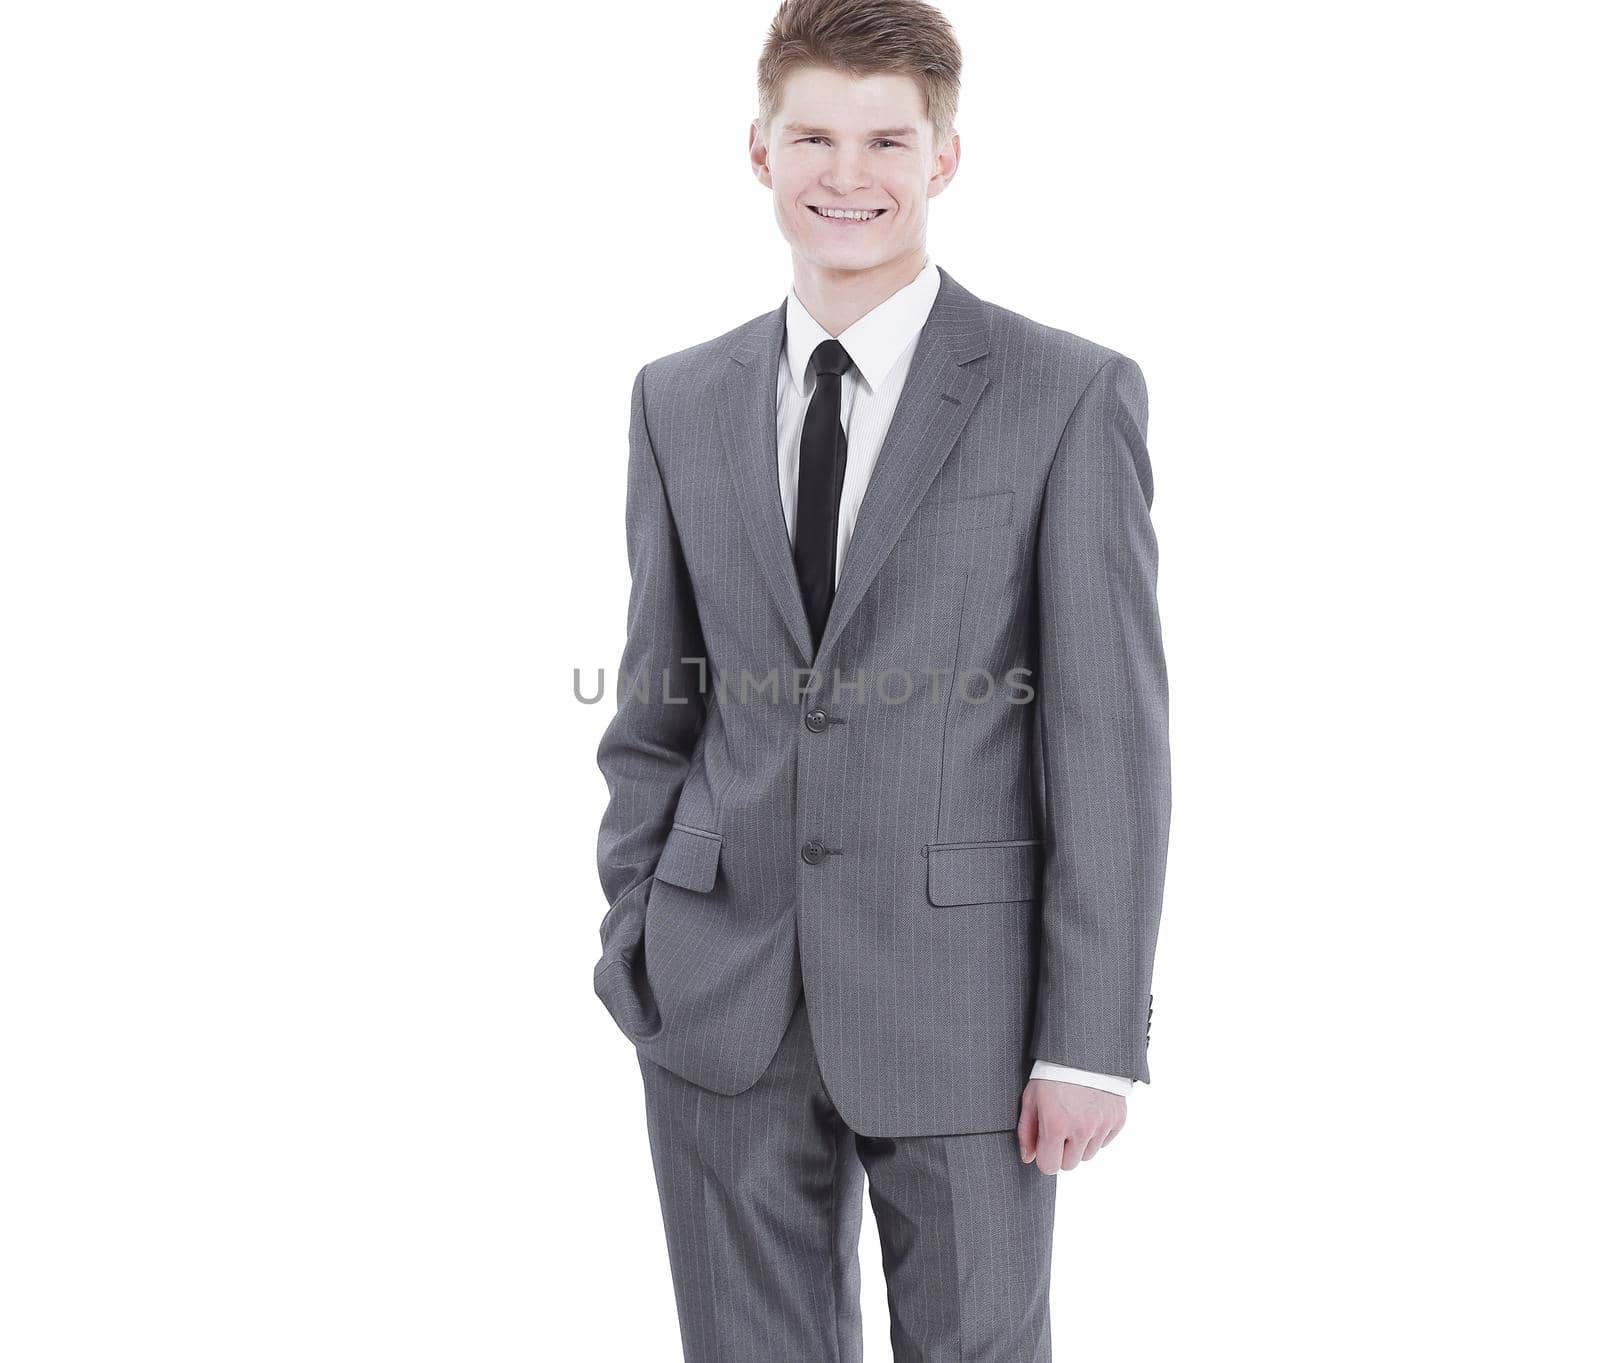 in full growth.portrait of a young professional.isolated on white